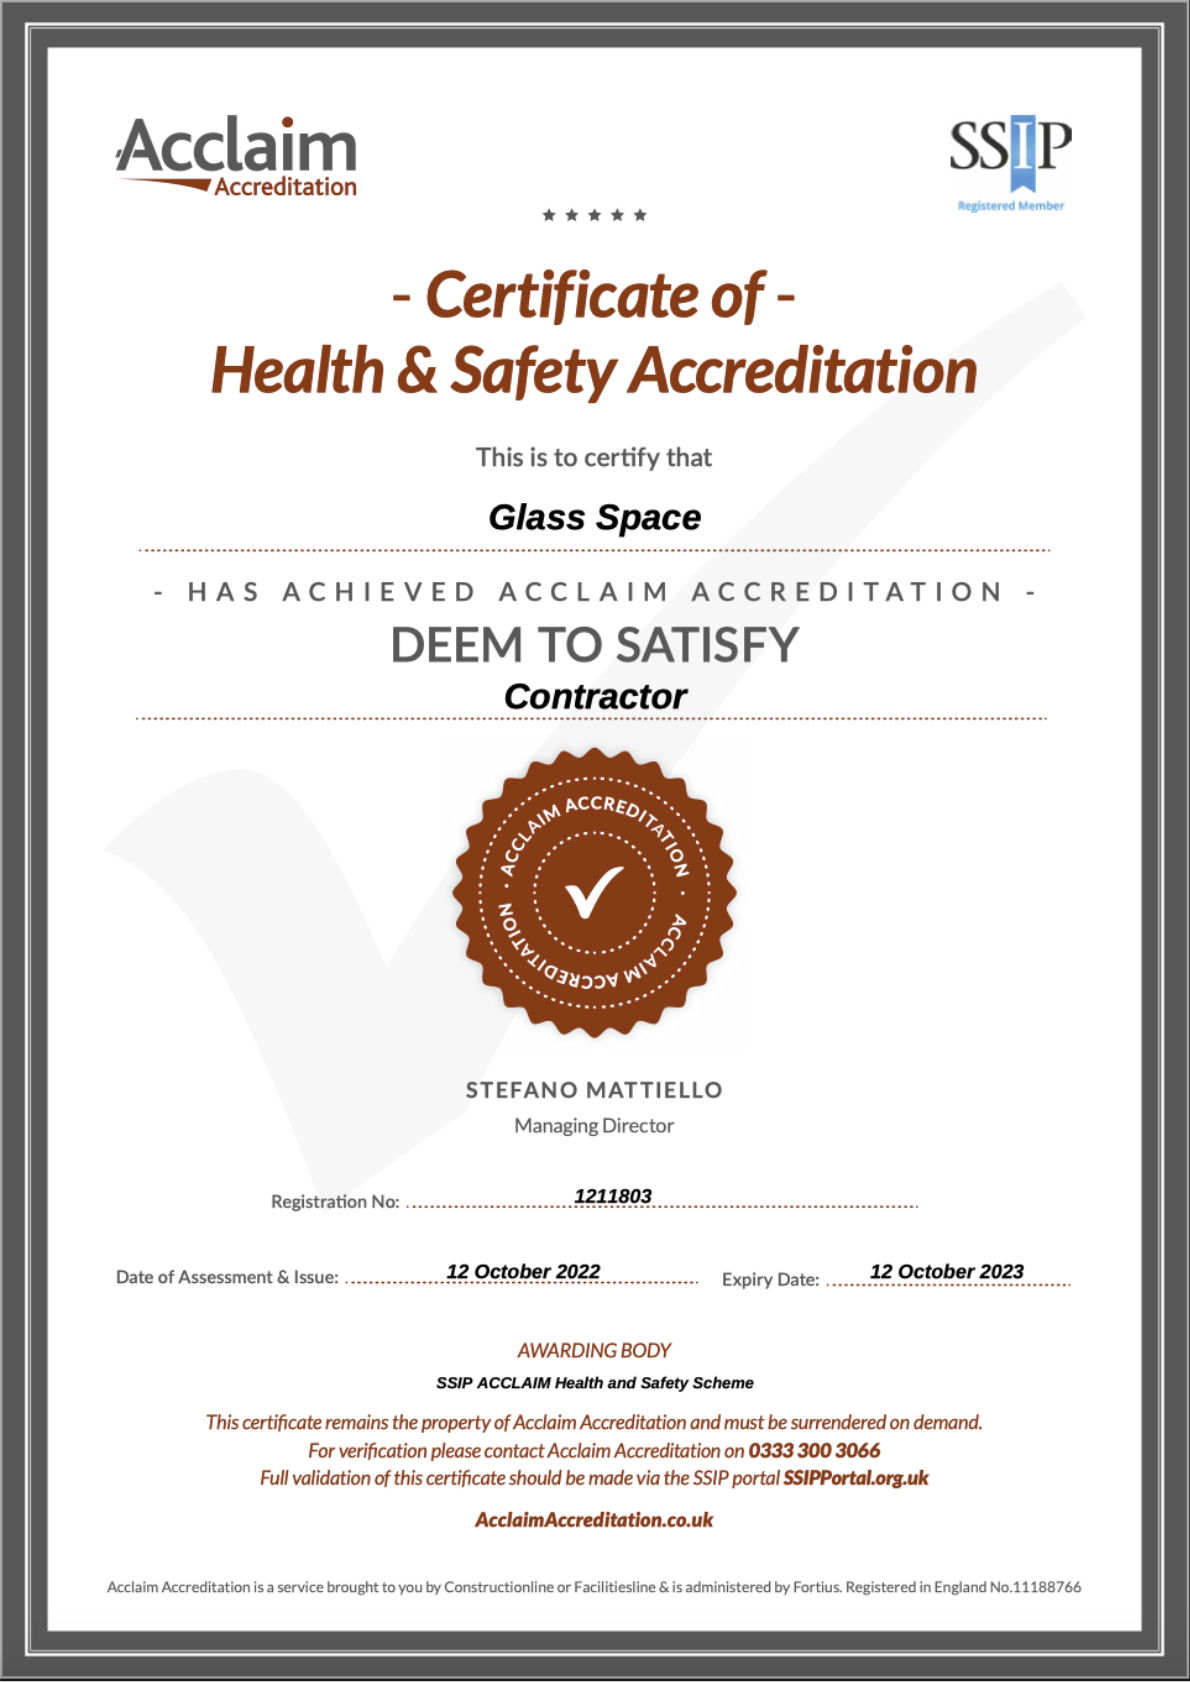 SSIP Acclaim Accreditation - Deem to Satisfy Contractor.